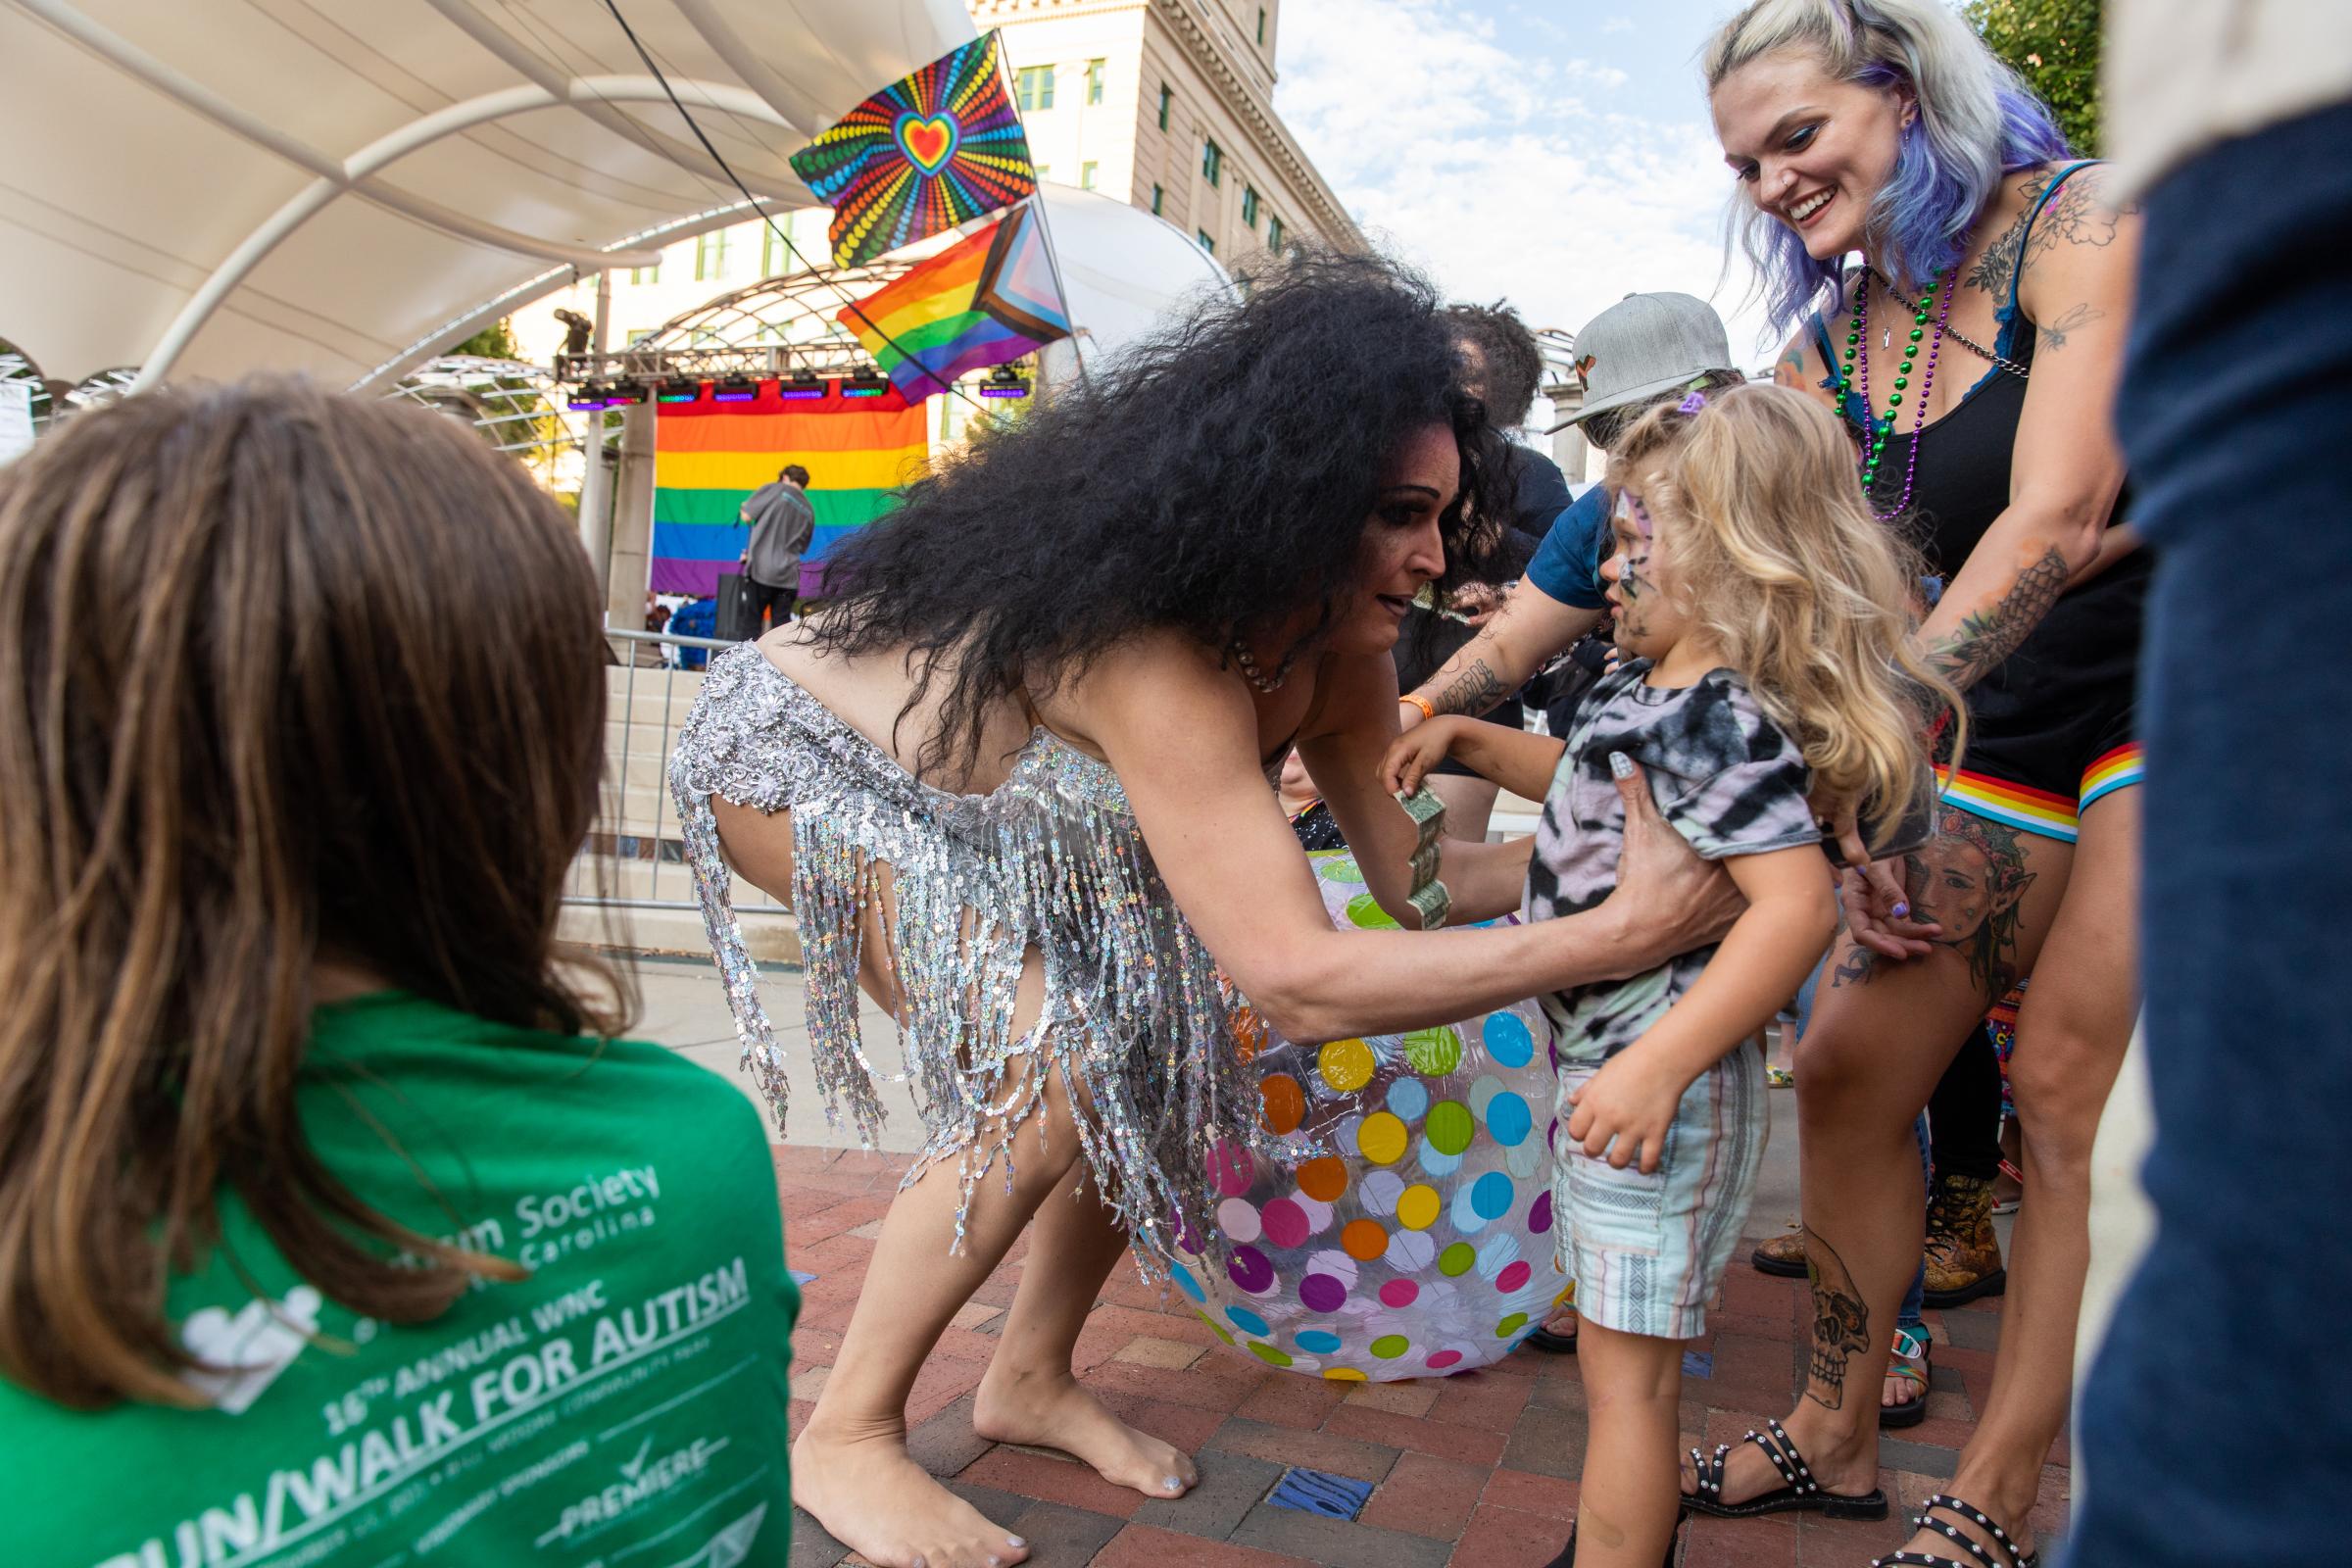 Blue Ridge Pride Festival 2022 - Families cheered on the drag performers.